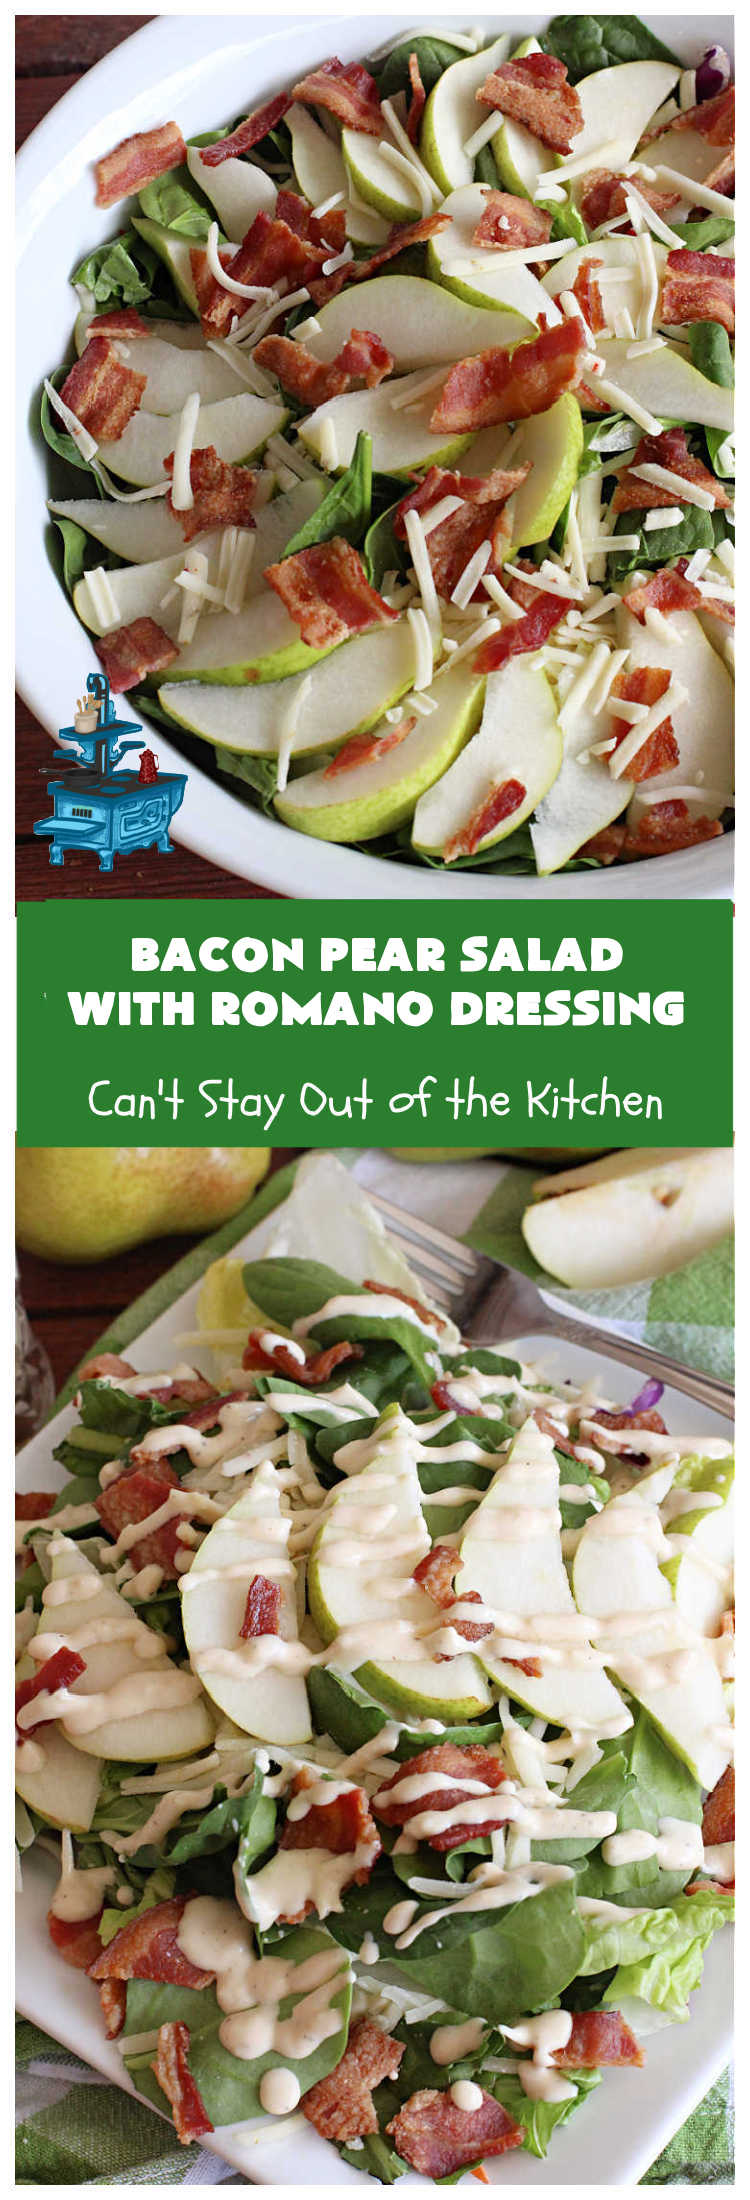 Bacon Pear Salad with Romano Dressing | Can't Stay Out of the KitchenBacon Pear Salad with Romano Dressing | Can't Stay Out of the Kitchen